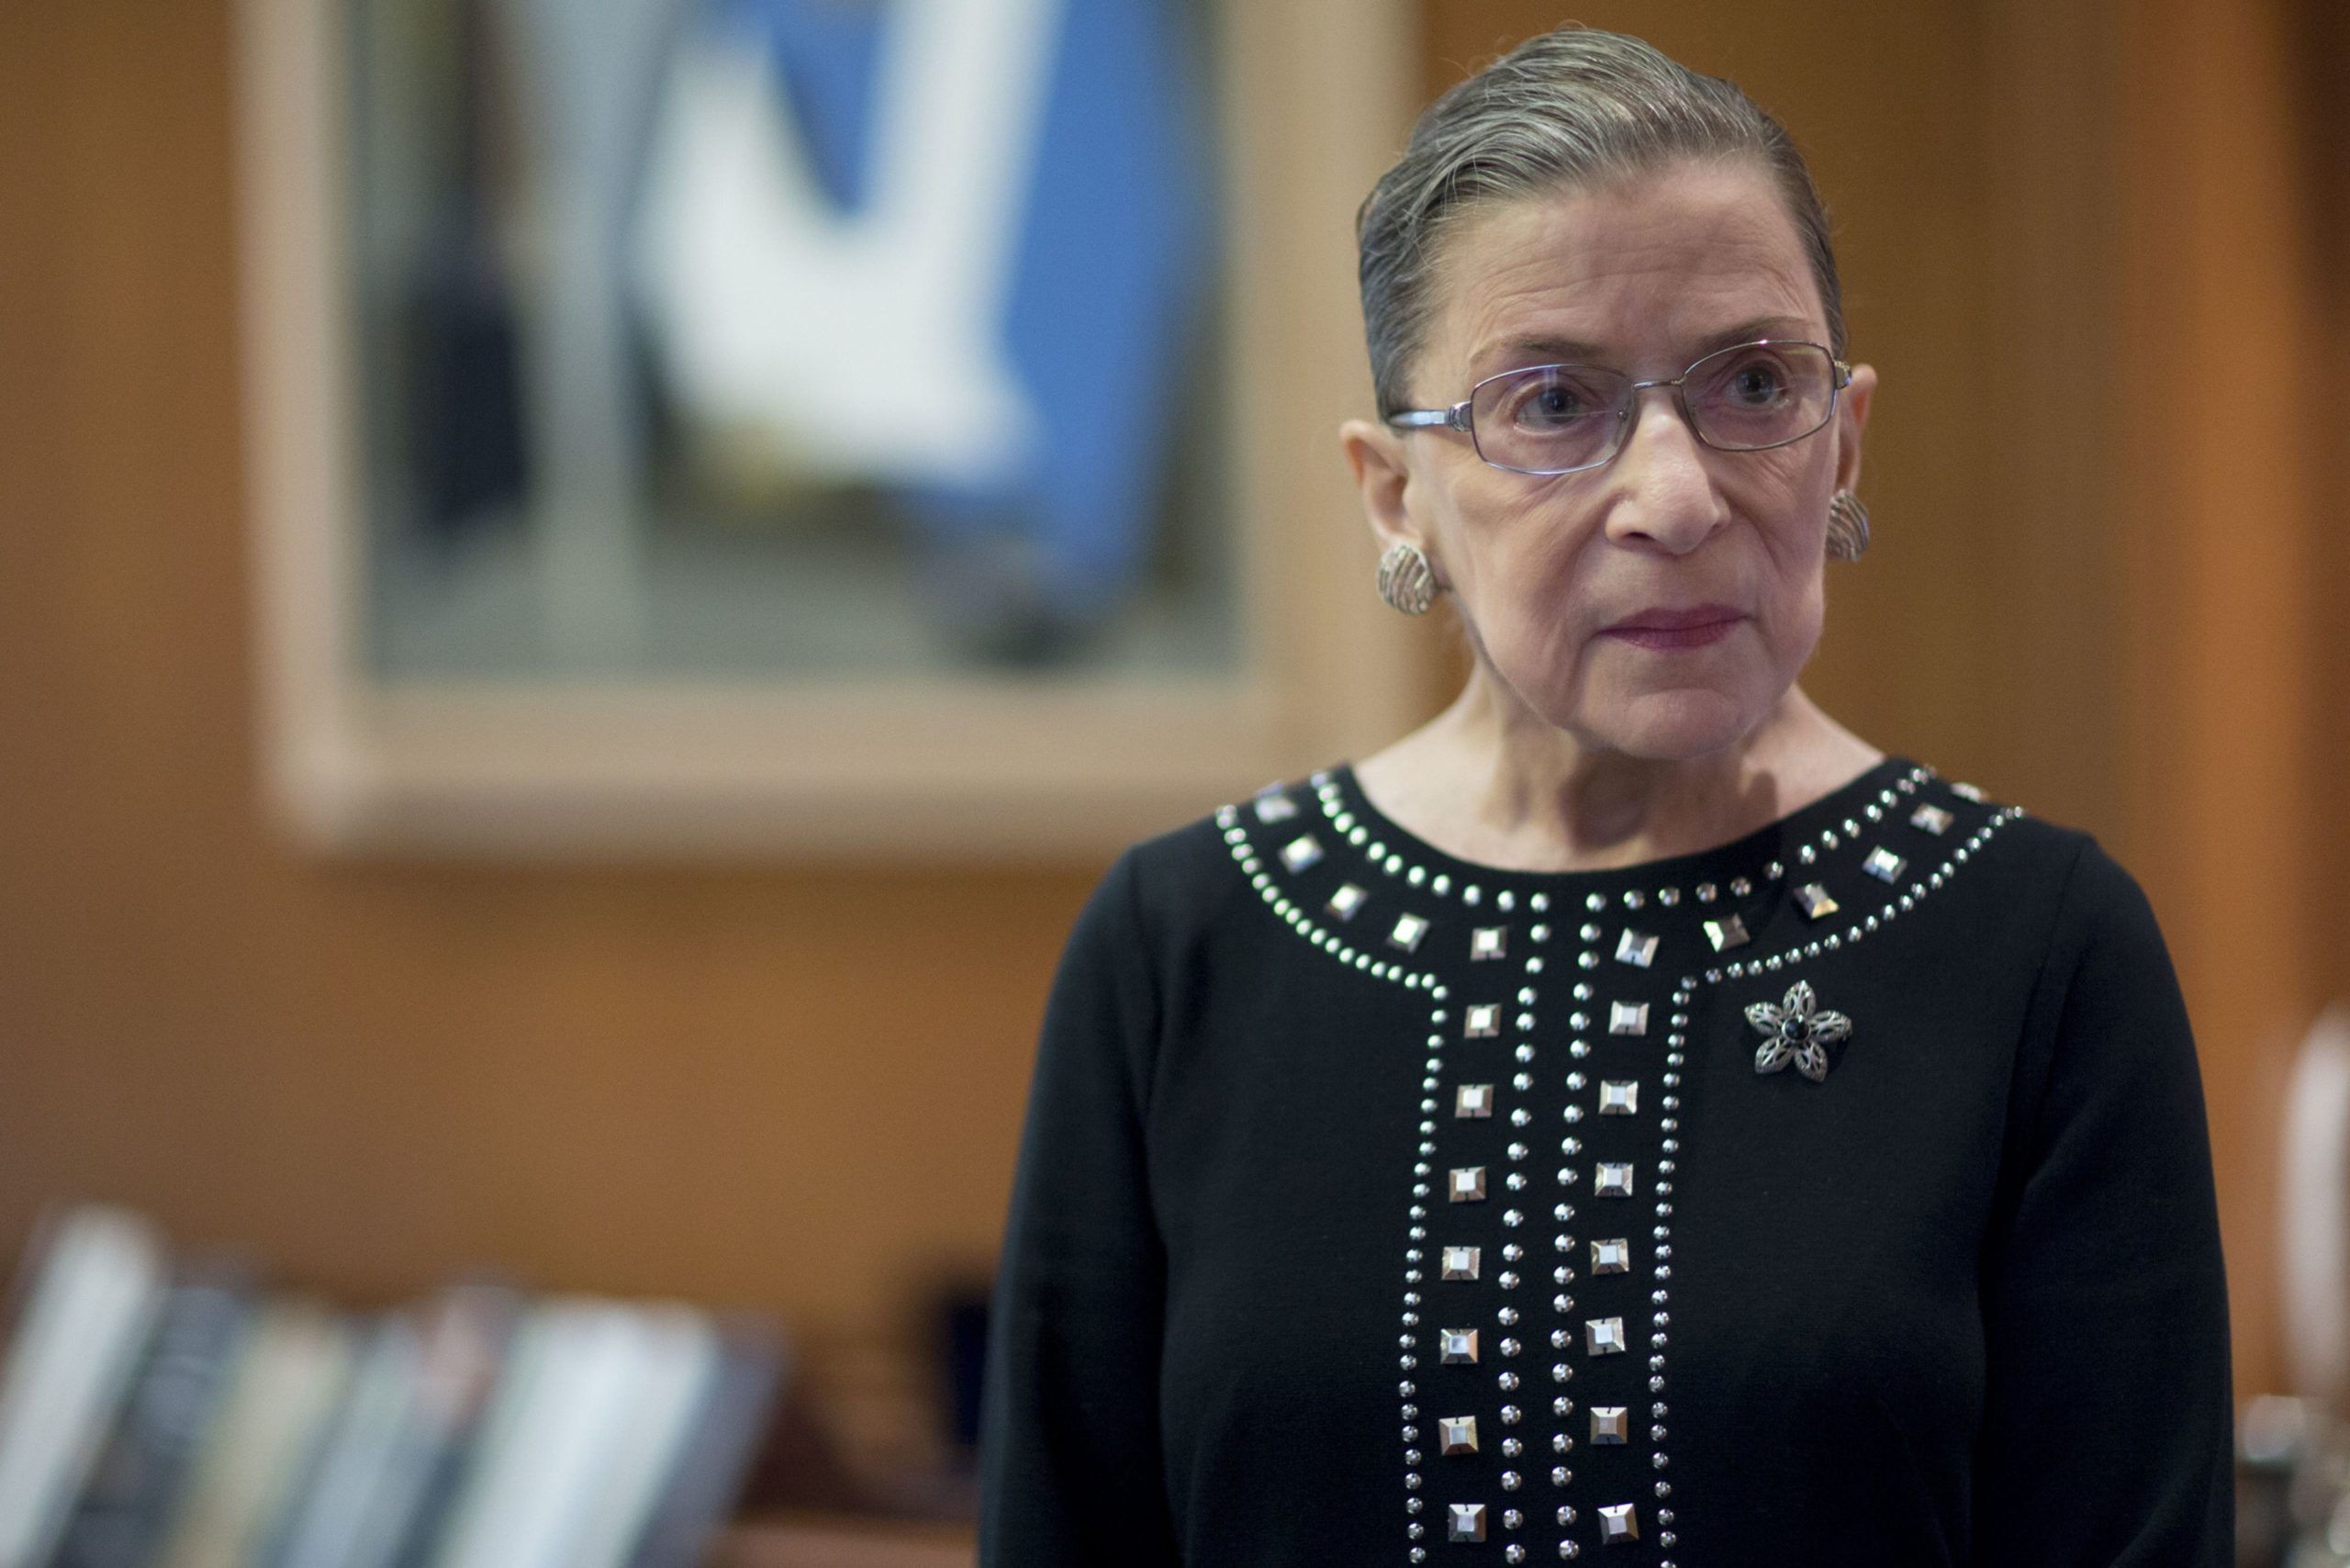 Ruth Bader Ginsburg, associate justice of the U.S. Supreme Court, stands in her chambers following an interview in Washington, D.C. 